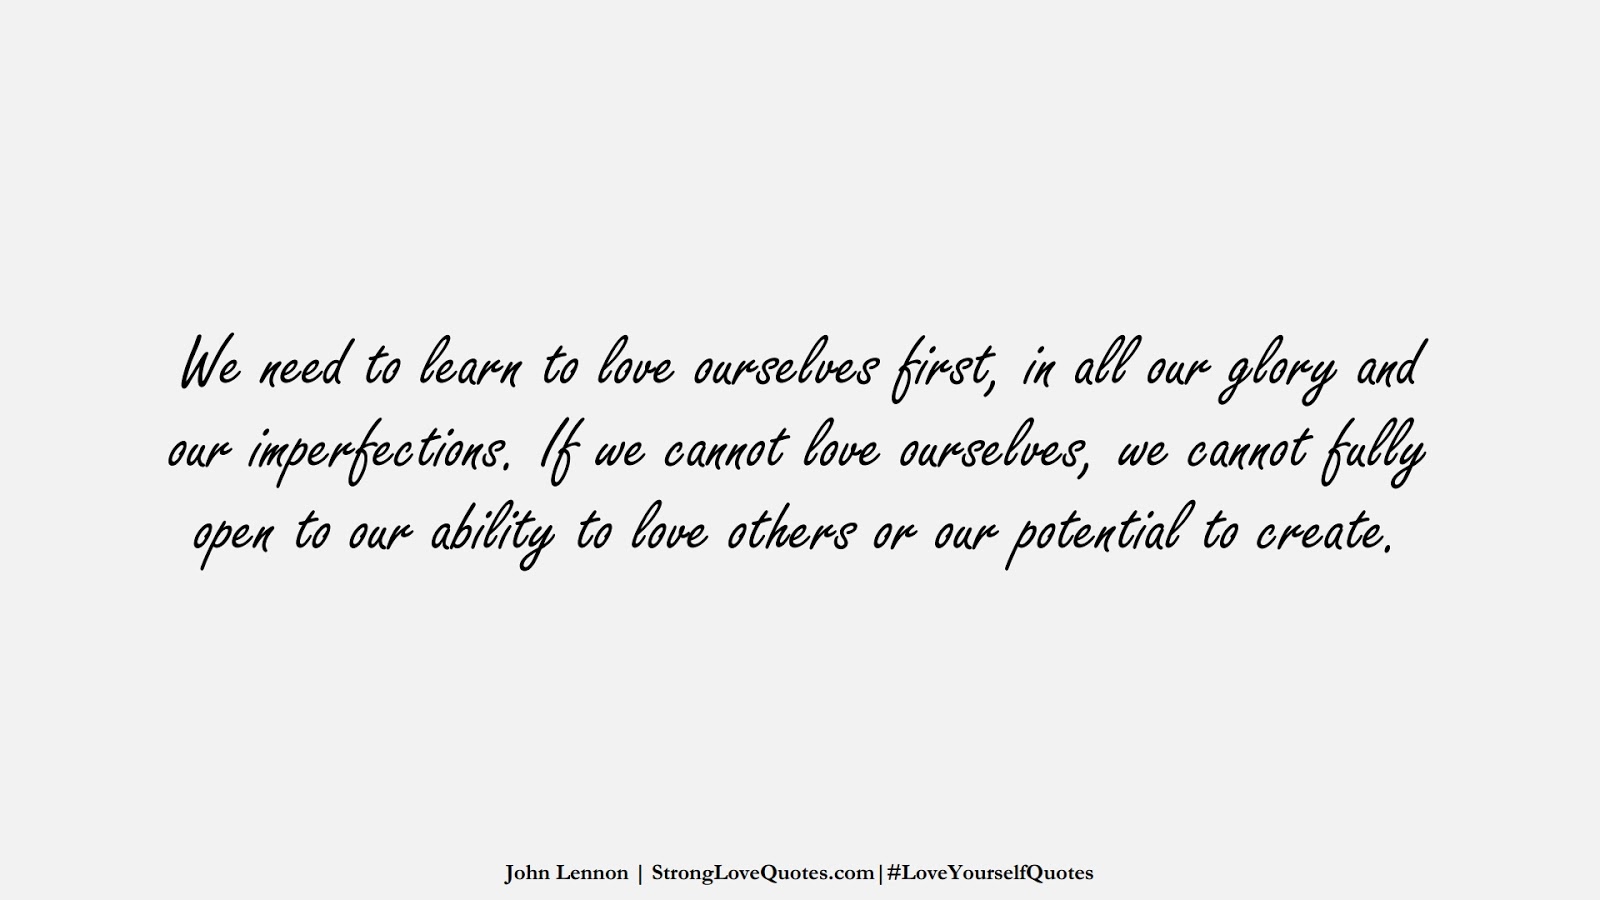 We need to learn to love ourselves first, in all our glory and our imperfections. If we cannot love ourselves, we cannot fully open to our ability to love others or our potential to create. (John Lennon);  #LoveYourselfQuotes